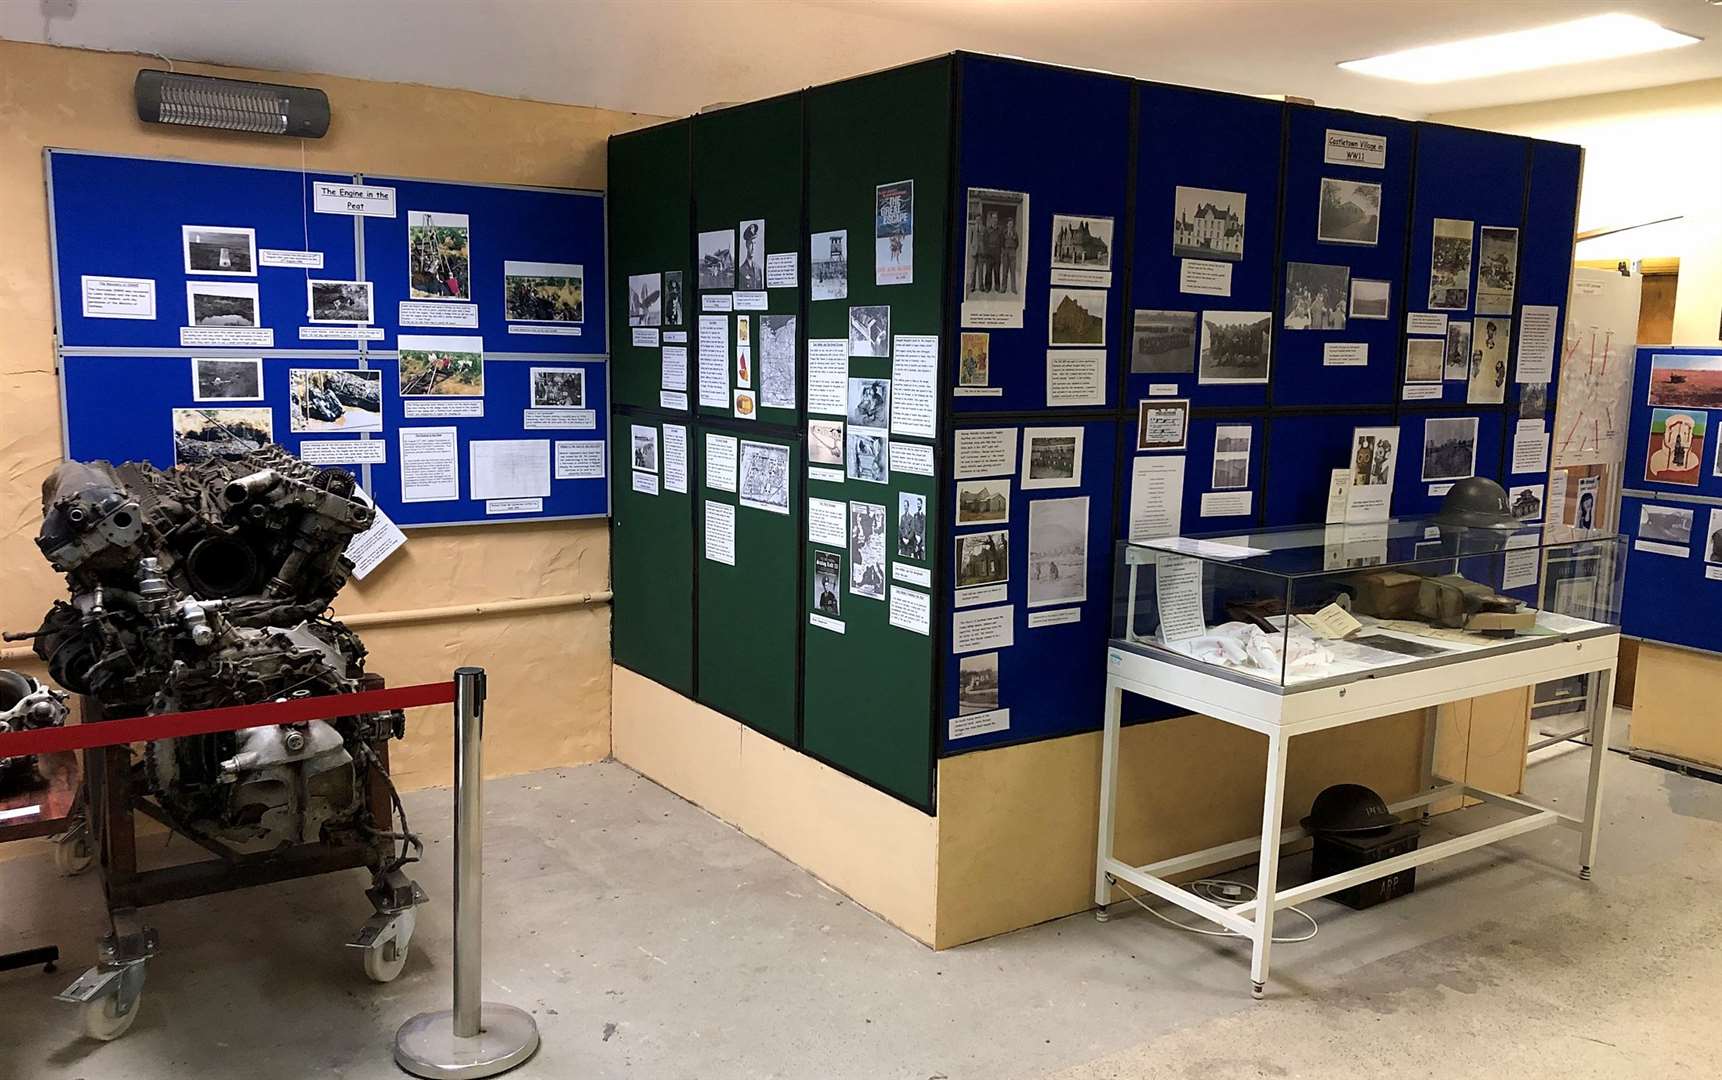 The new display area, including the Merlin engine from the single seater Hawker Hurricane fighter aircraft which flew from RAF Castletown. Picture: Neil Buchan